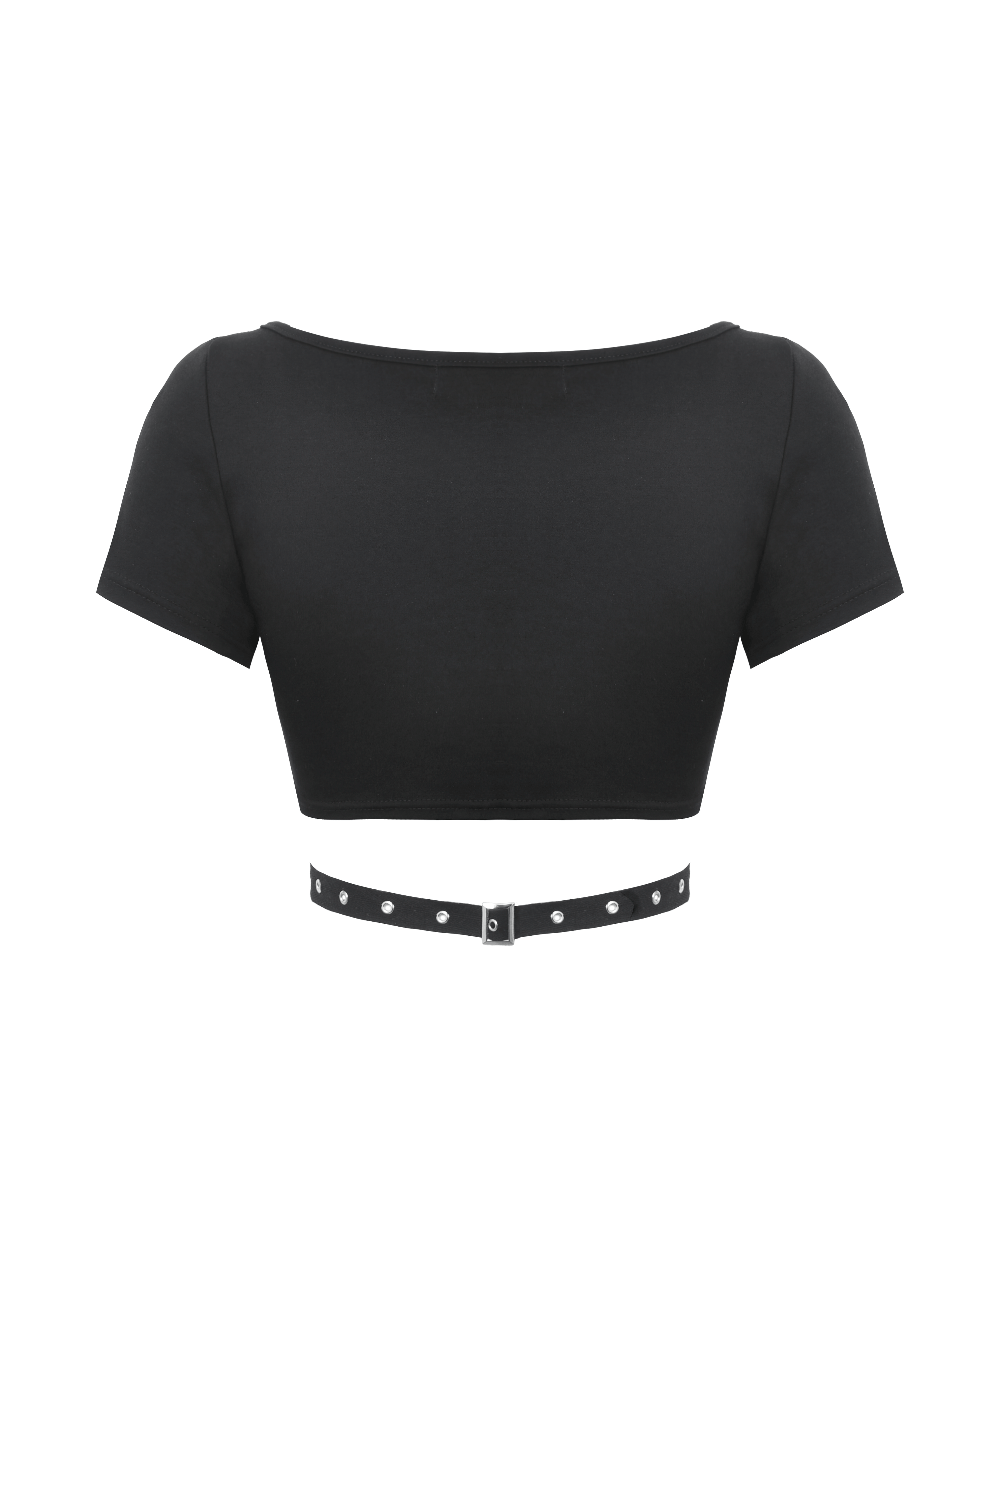 Stylish Punk Women's Crop Top with Metal Accents